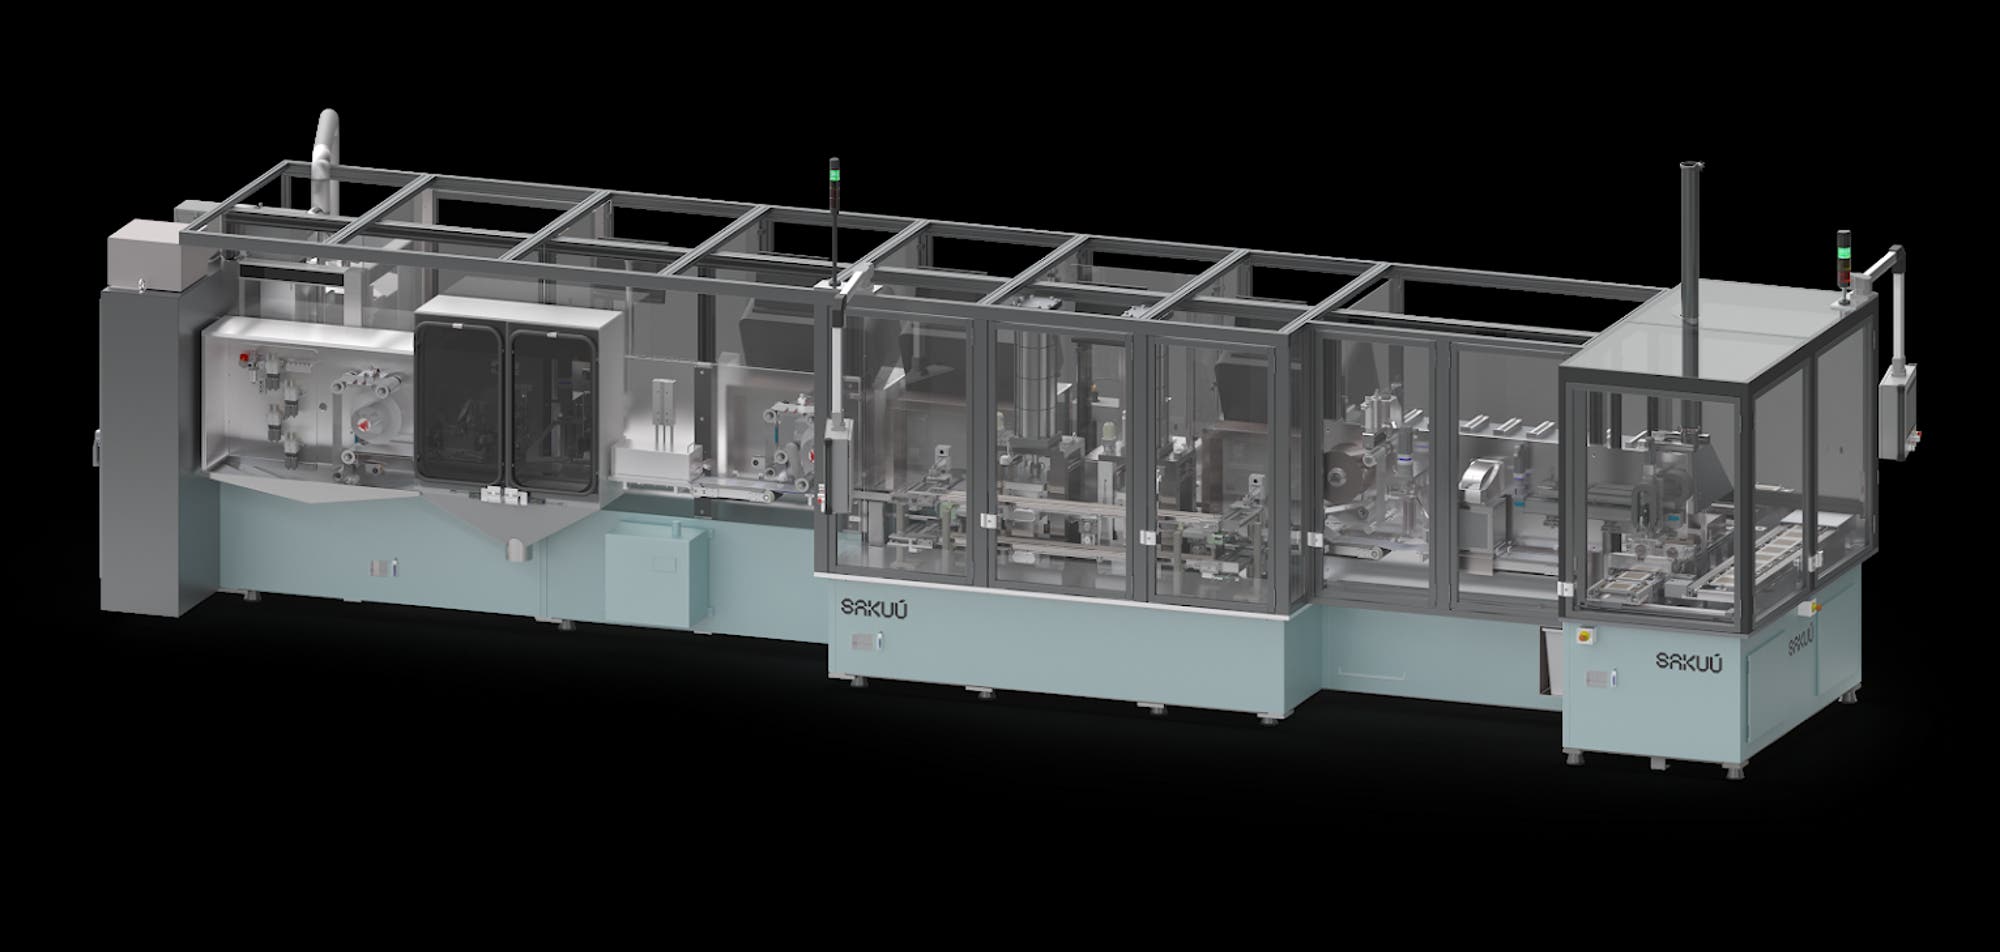 Sakuu Announces 3D-Printed Solid-State Battery Success - CleanTechnica